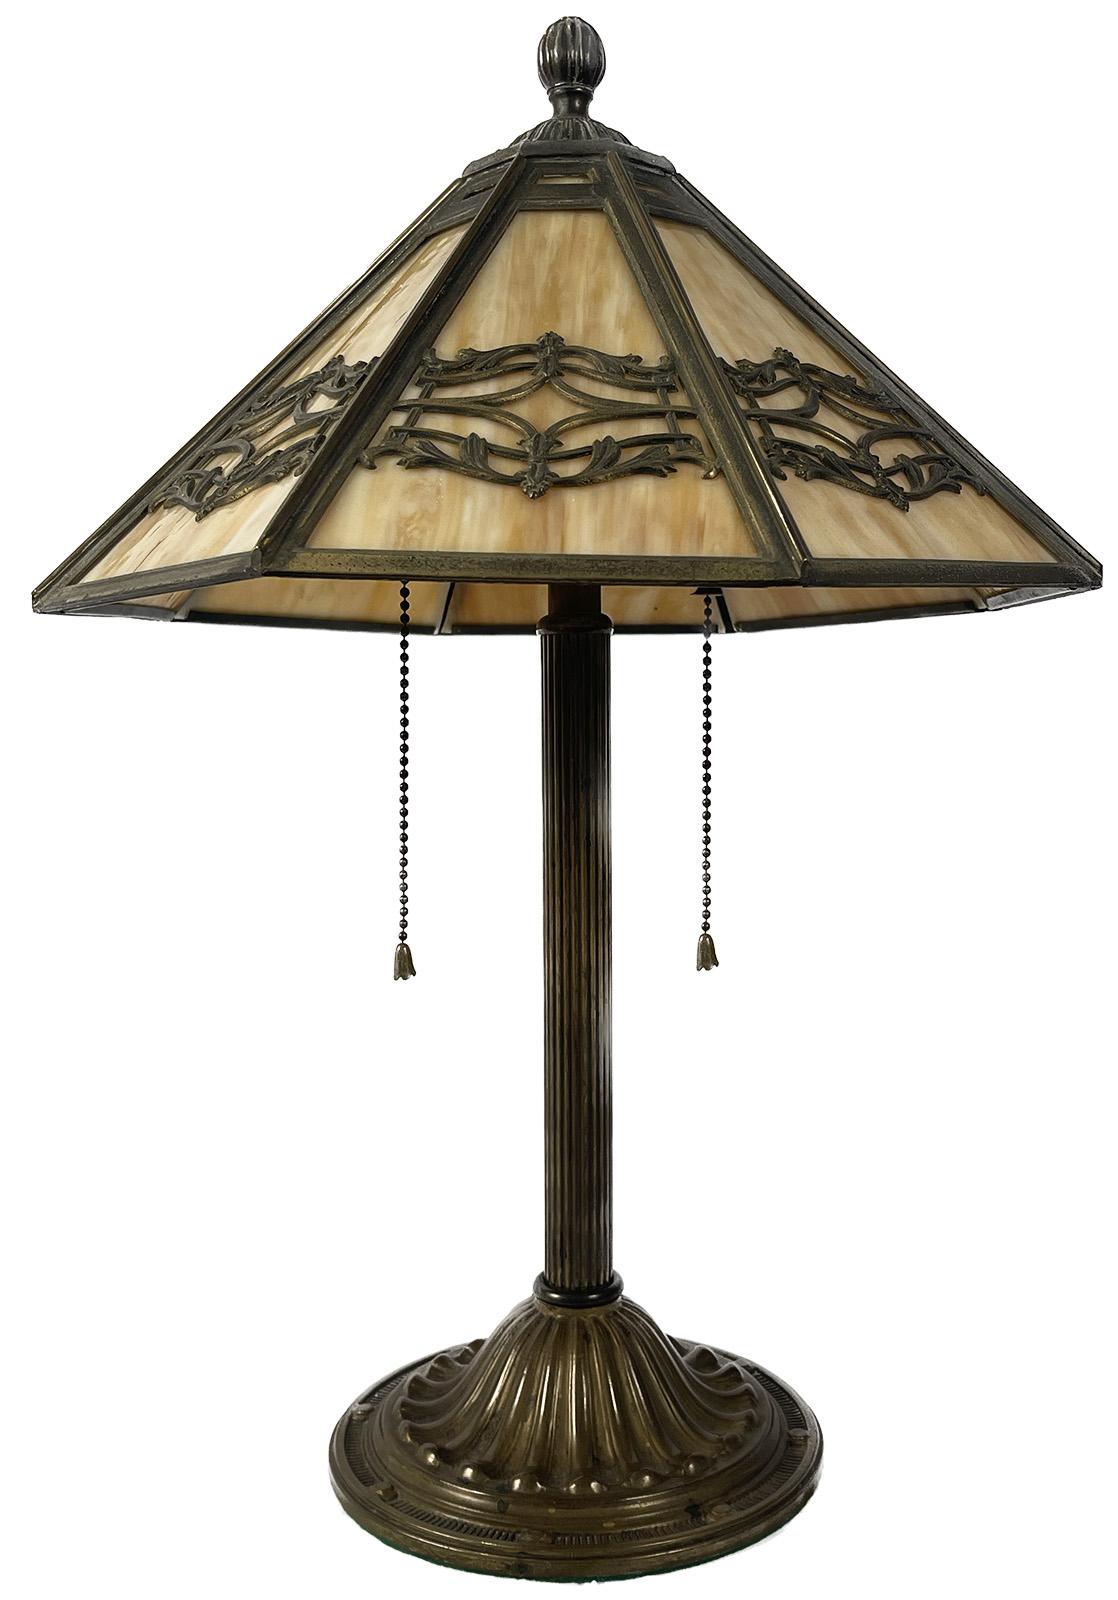 An early 20th century Art Nouveau style bronze table lamp with slag glass. 

Dimensions: 20